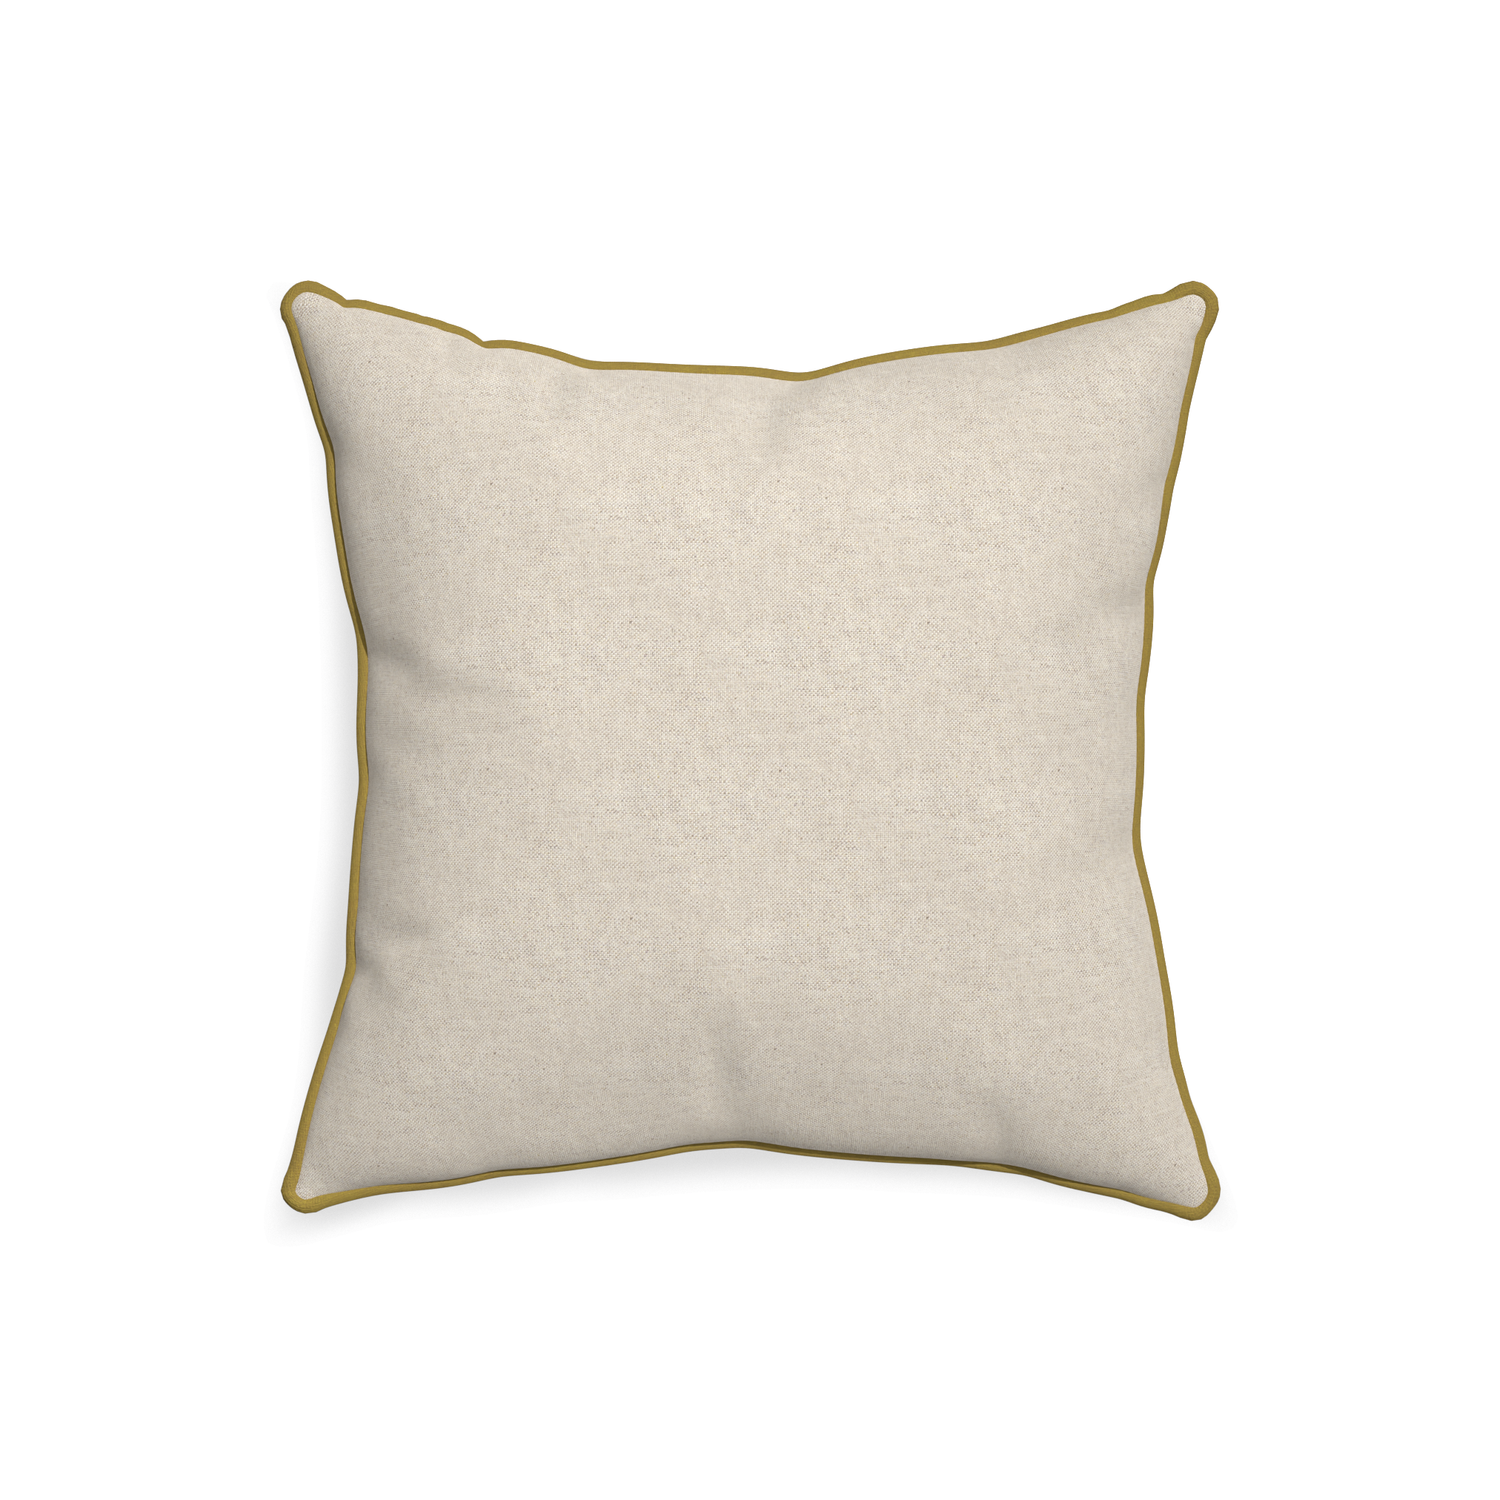 20-square oat custom light brownpillow with c piping on white background